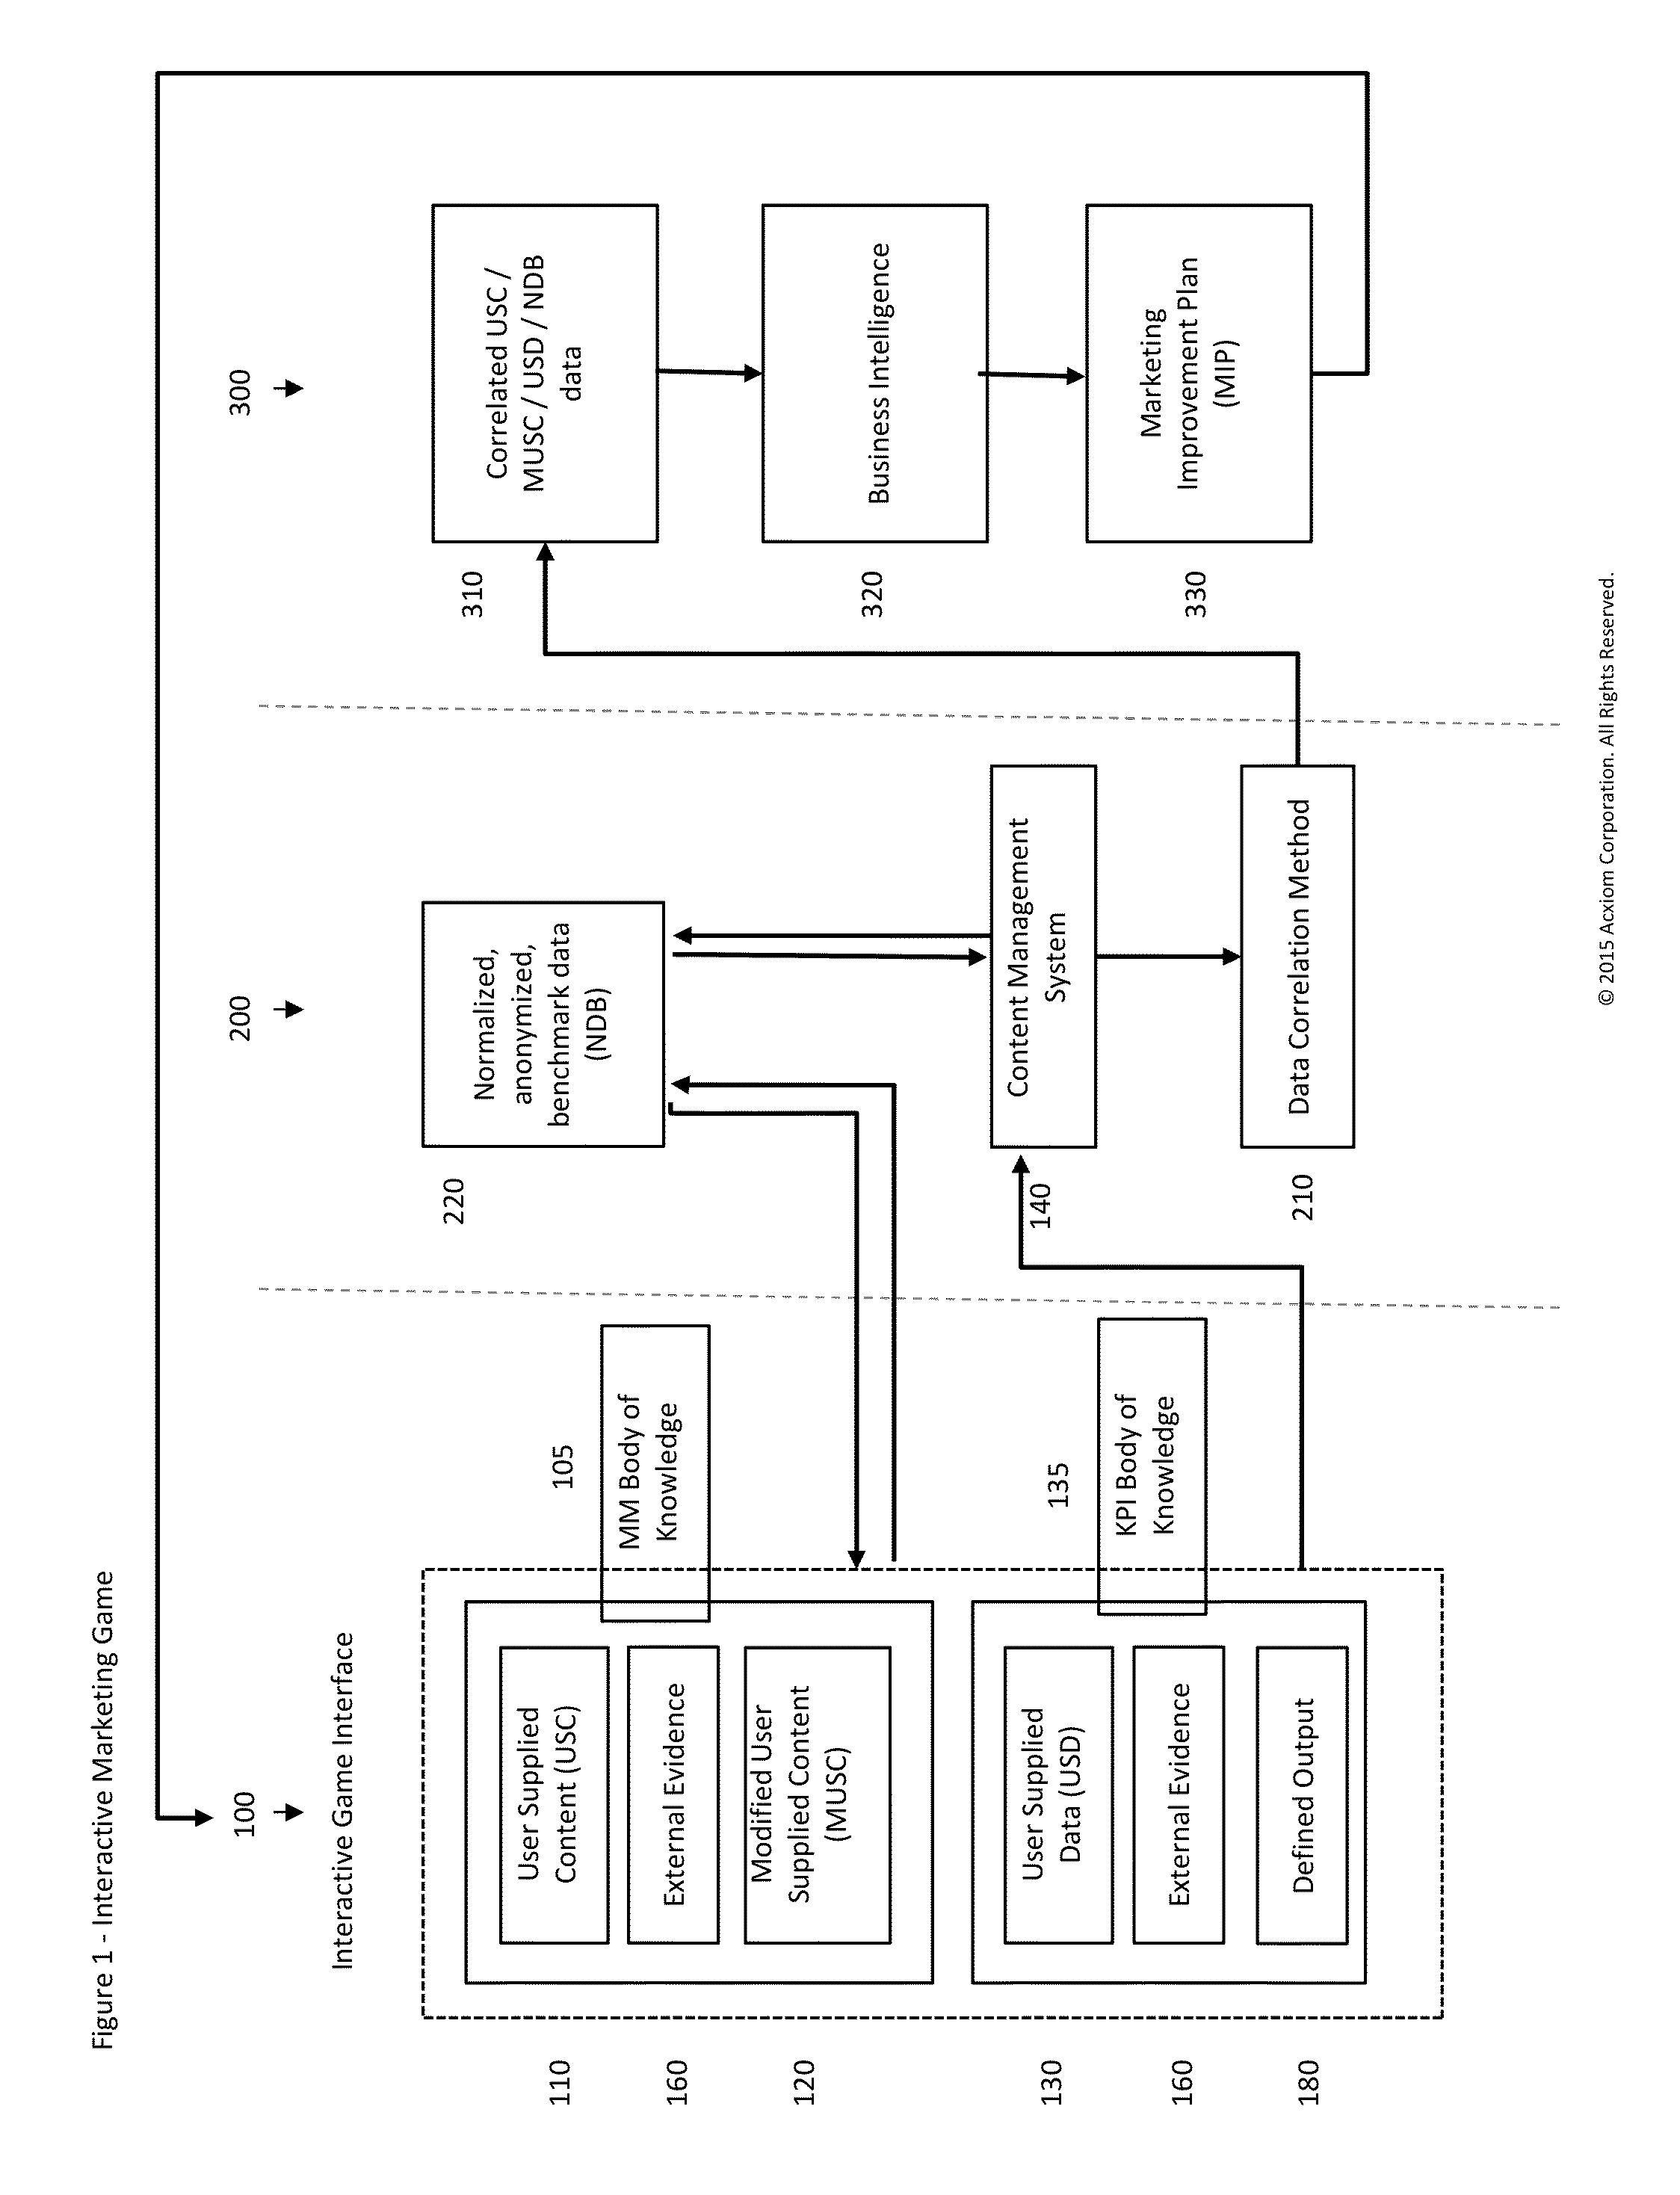 Interactive Marketing Simulation System and Method